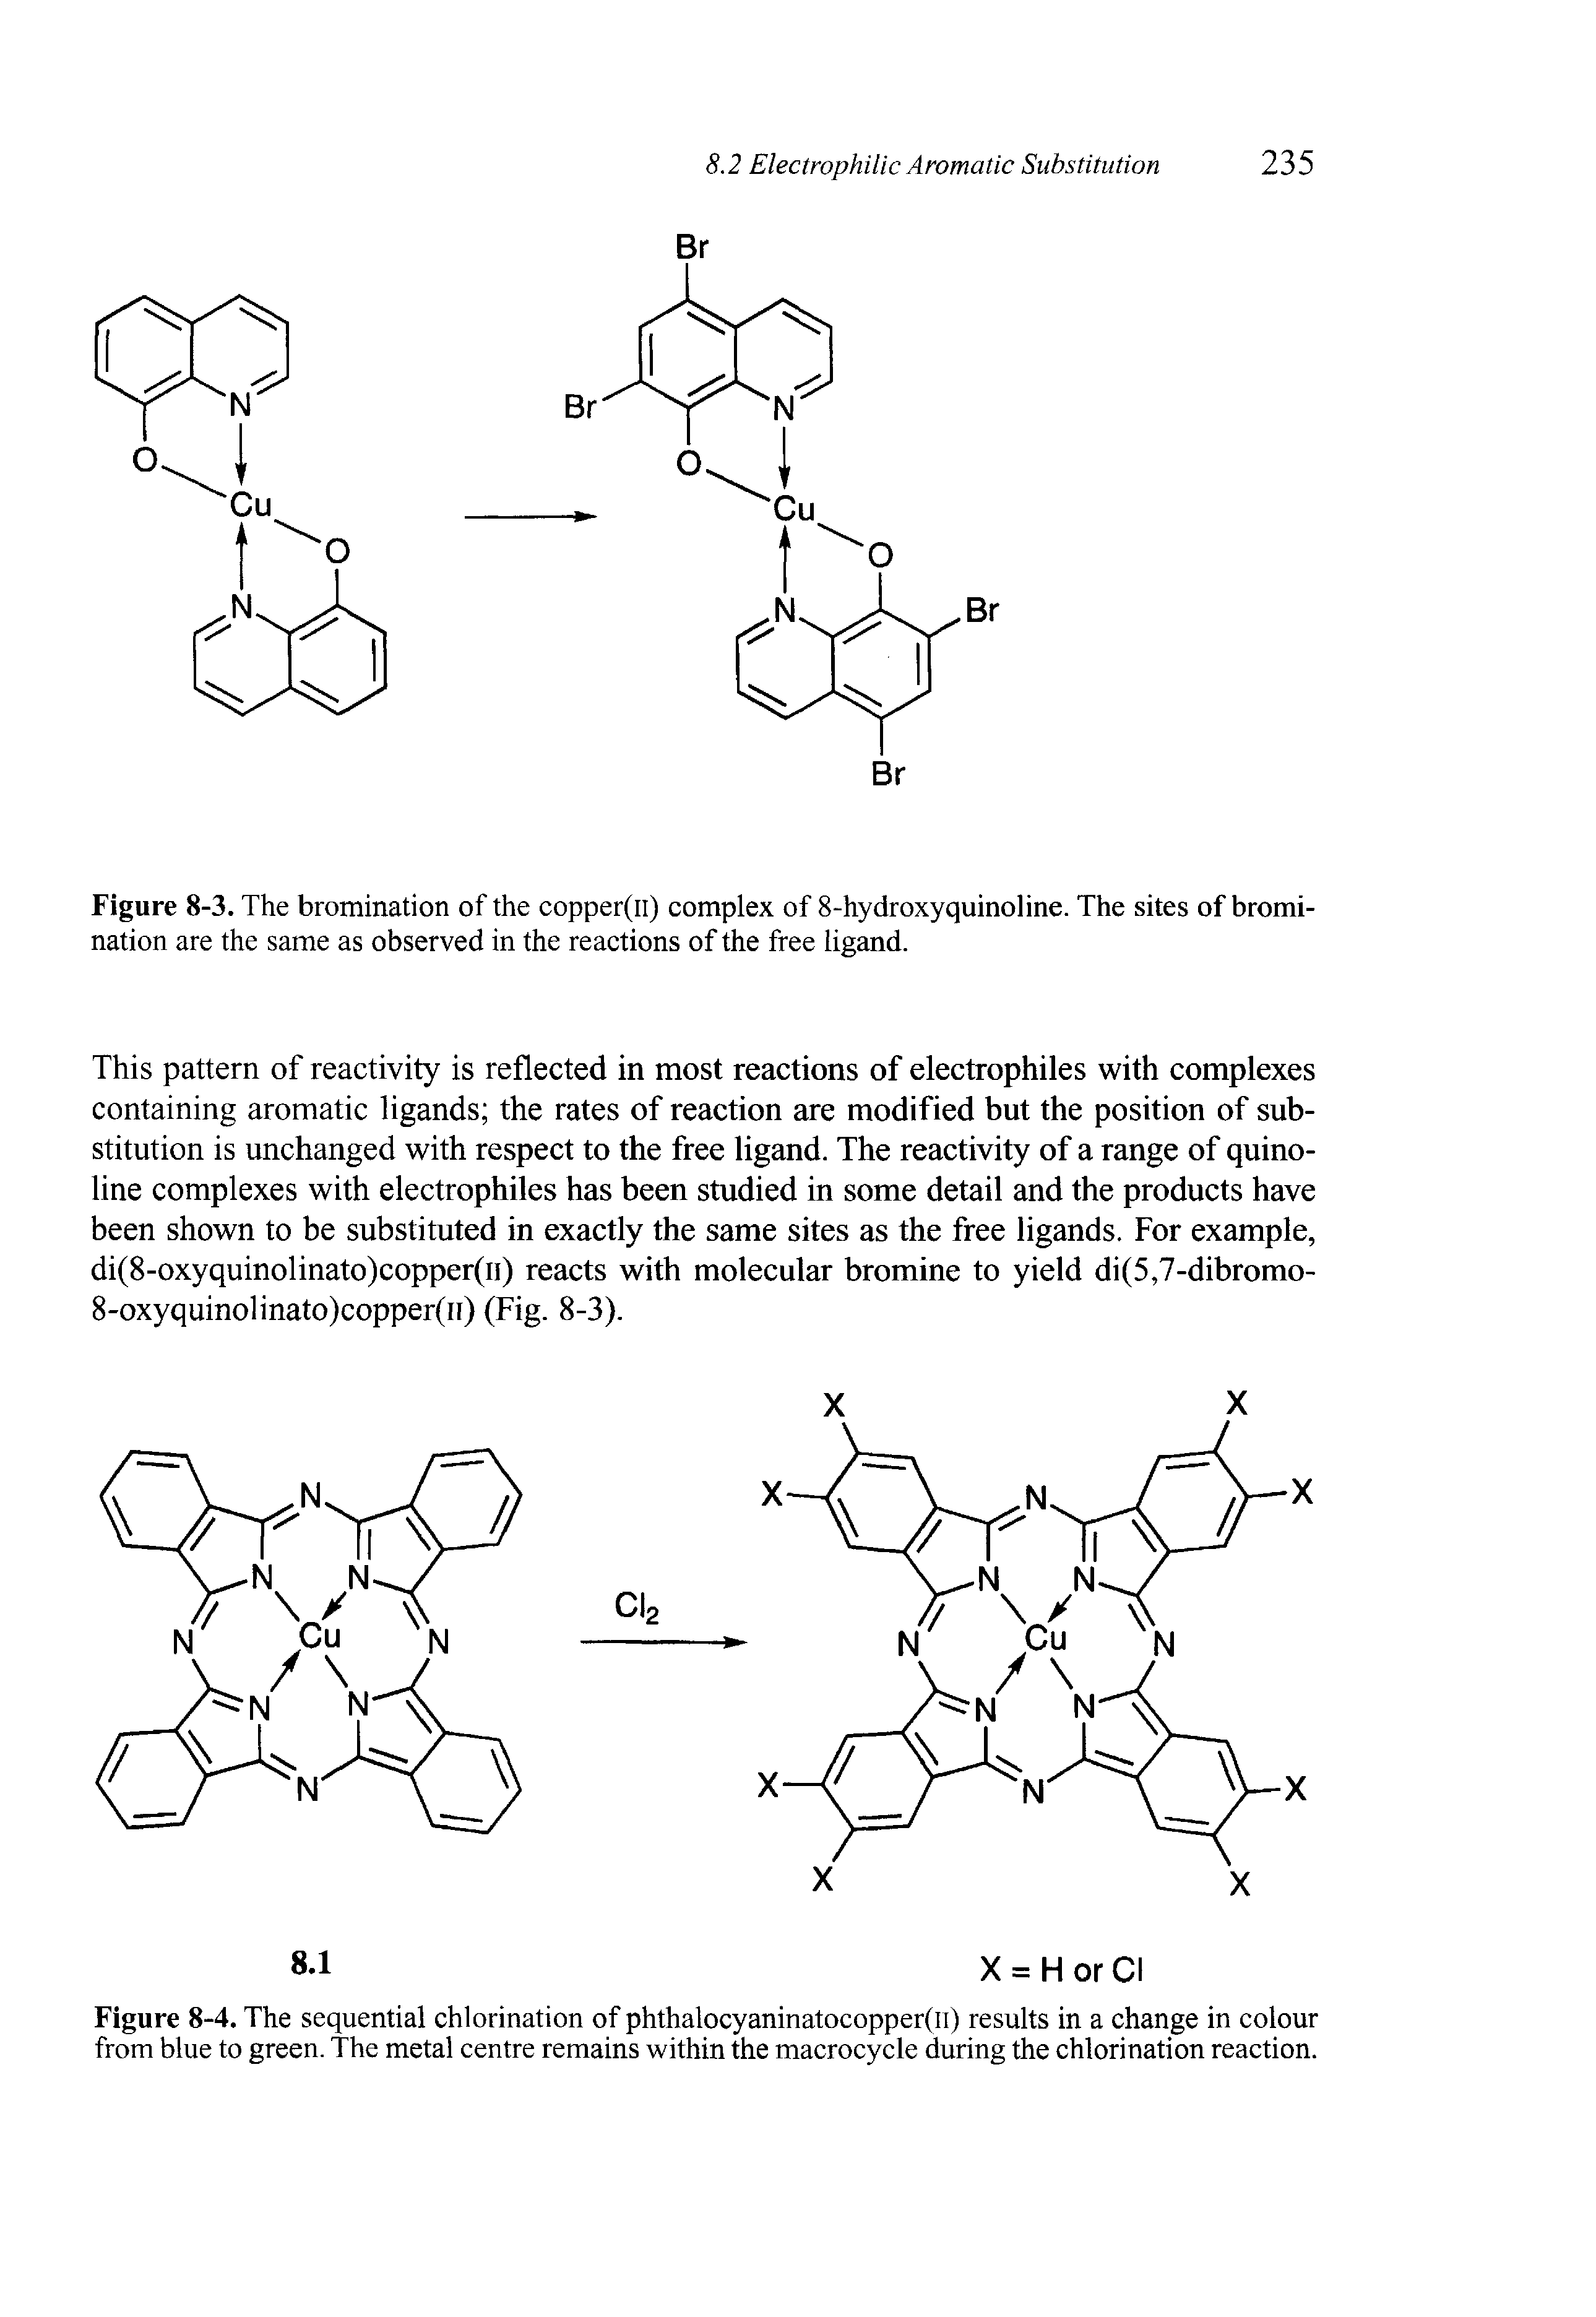 Figure 8-3. The bromination of the copper(n) complex of 8-hydroxyquinoline. The sites of bromi-nation are the same as observed in the reactions of the free ligand.